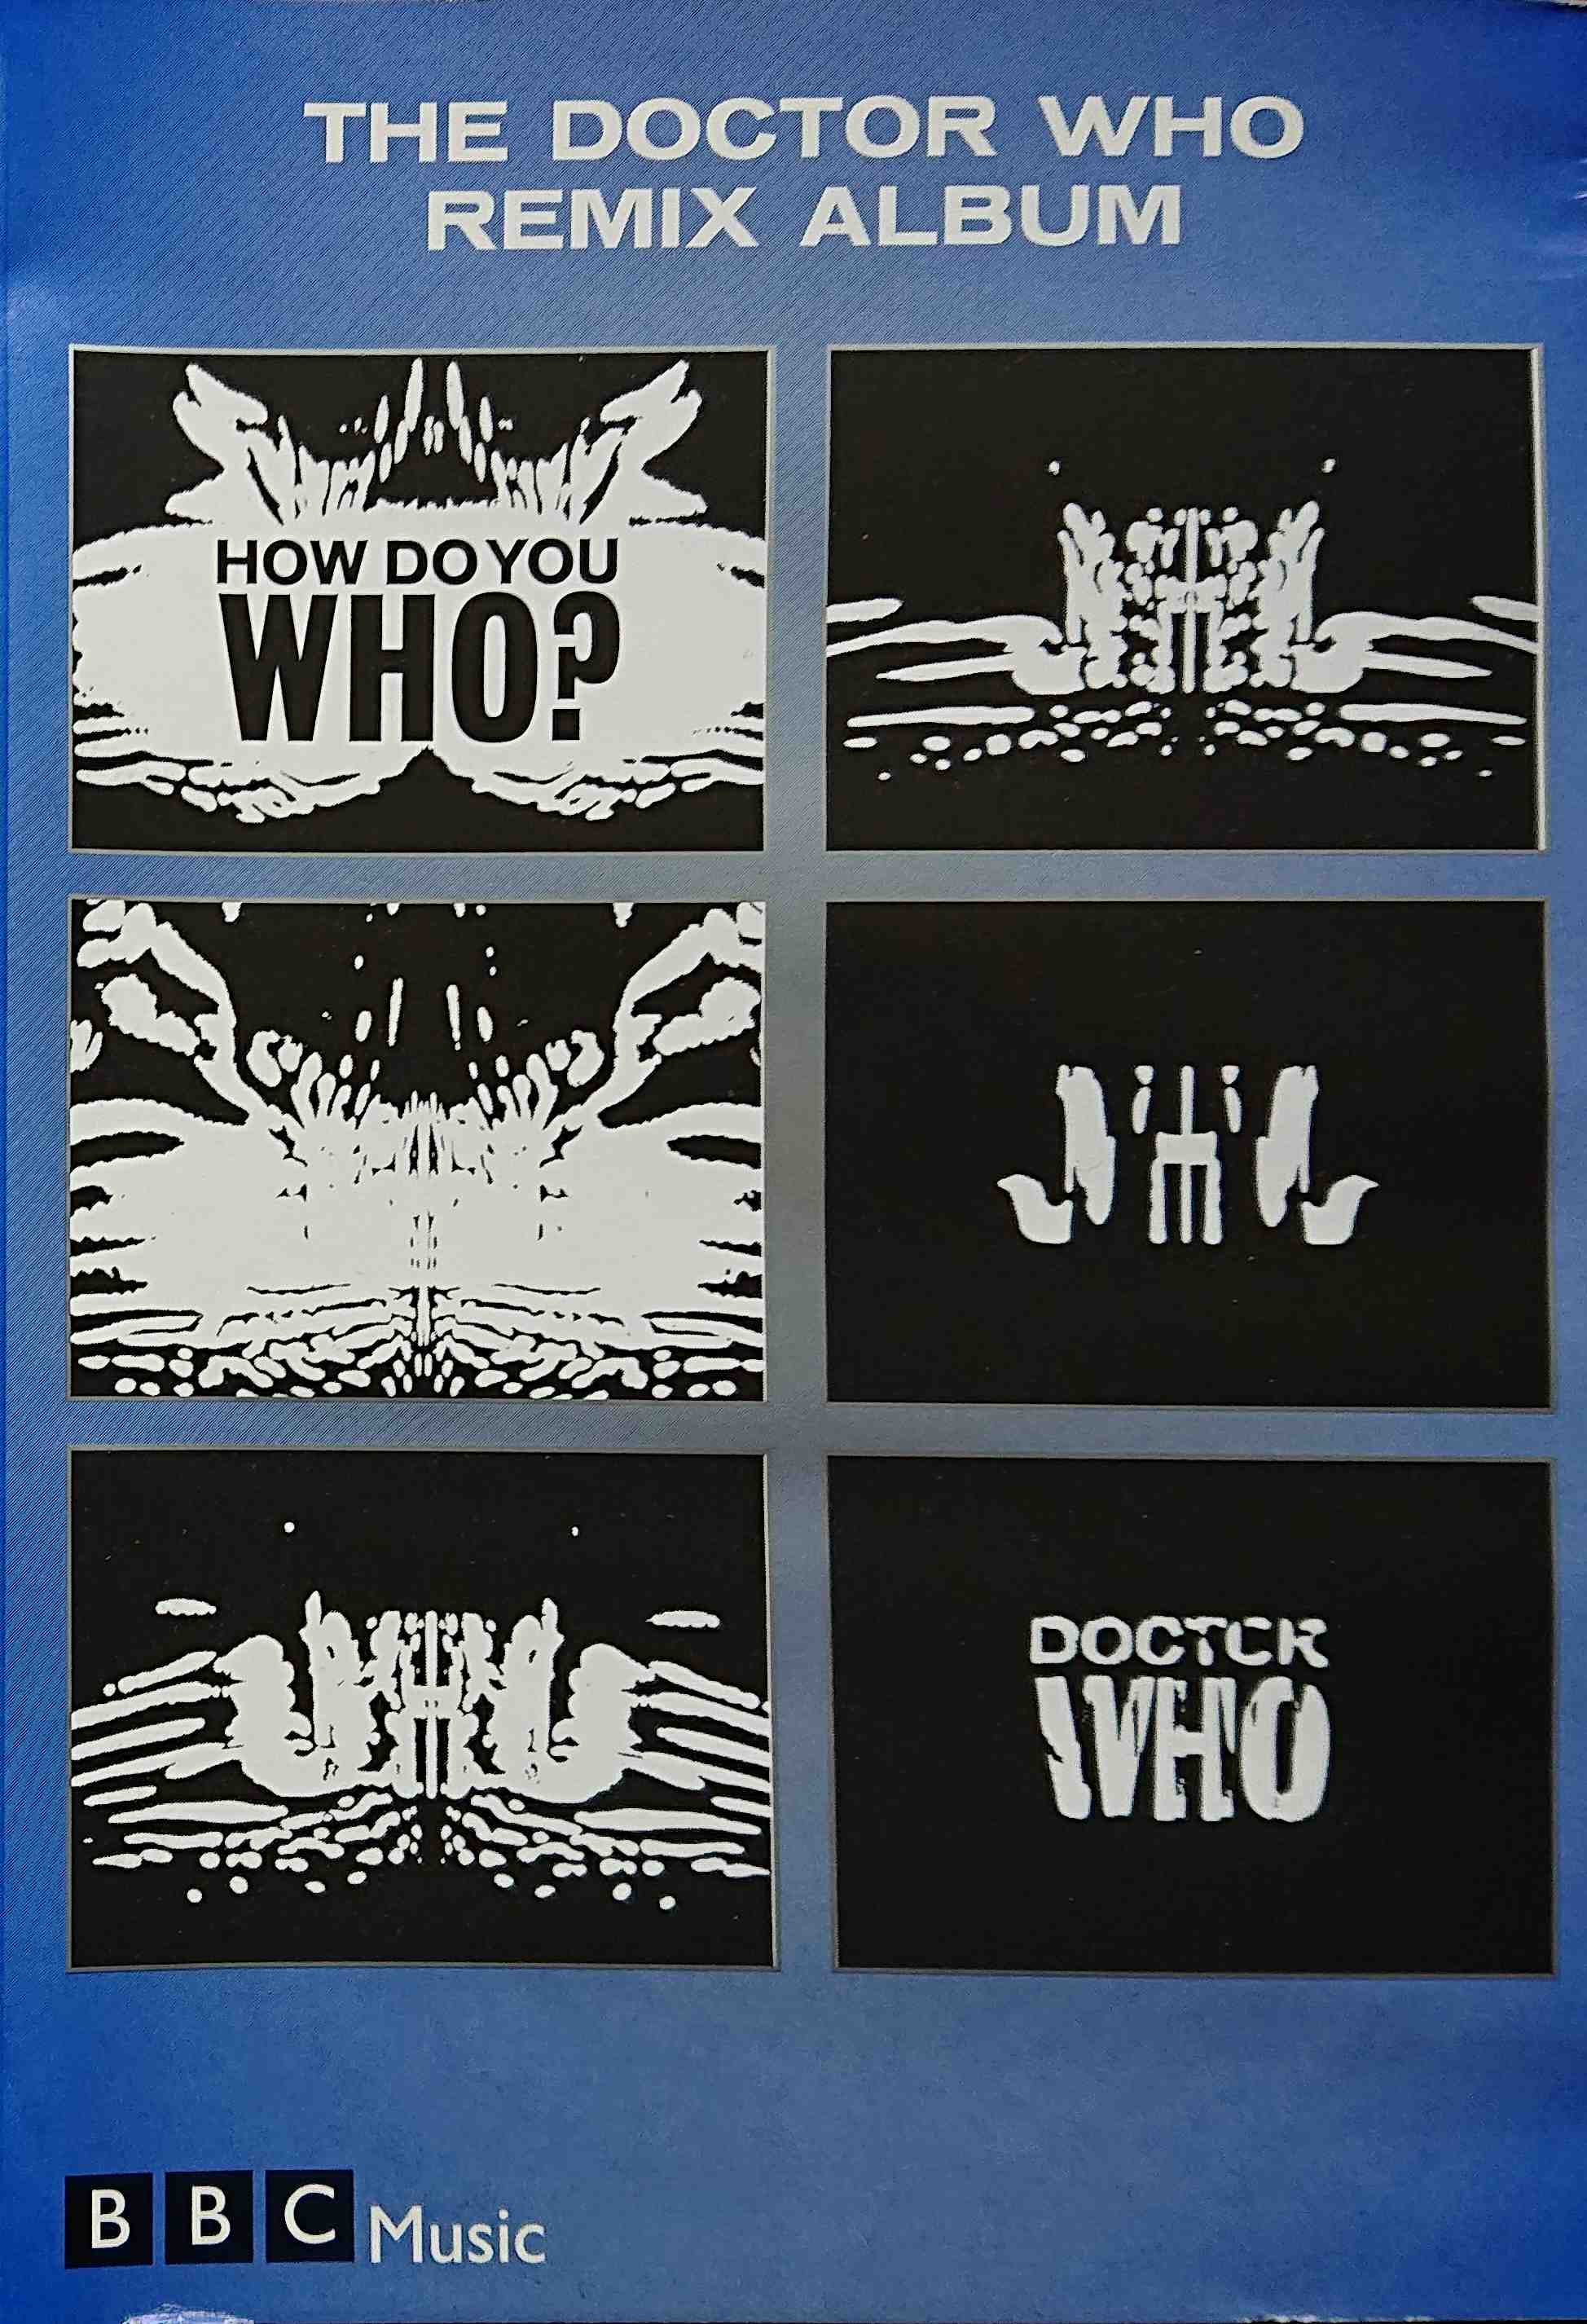 Picture of DVD-TDWRA Doctor Who - The Doctor Who remix album by artist Various from the BBC records and Tapes library